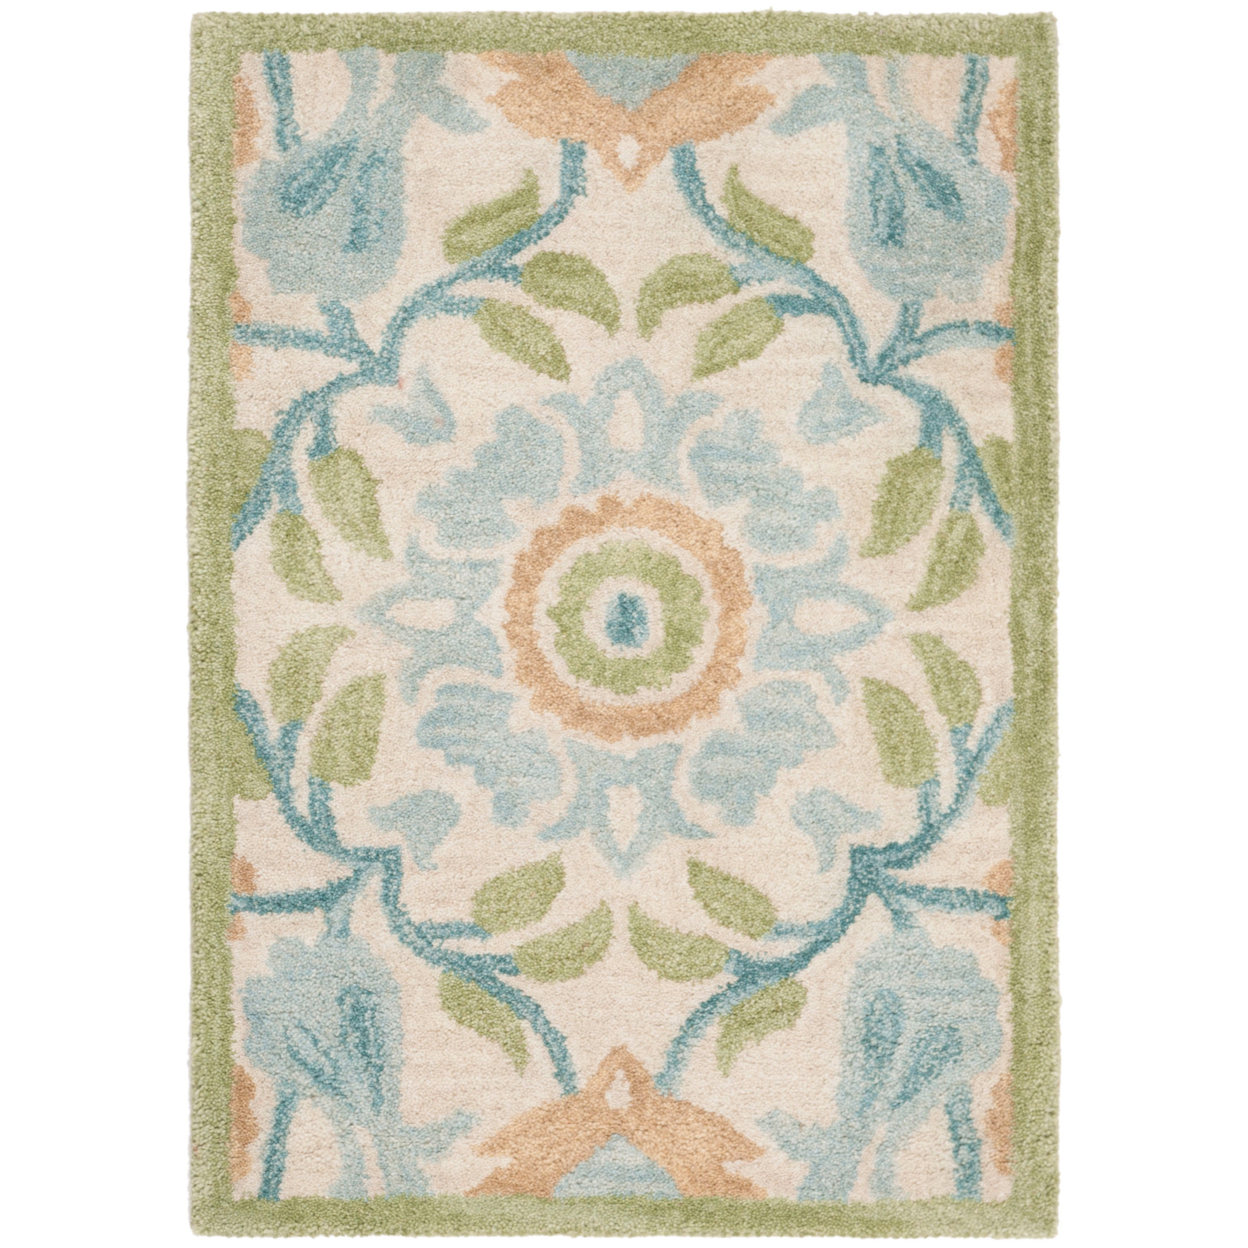 SAFAVIEH AT59A Antiquity Ivory / Green - 6' Square